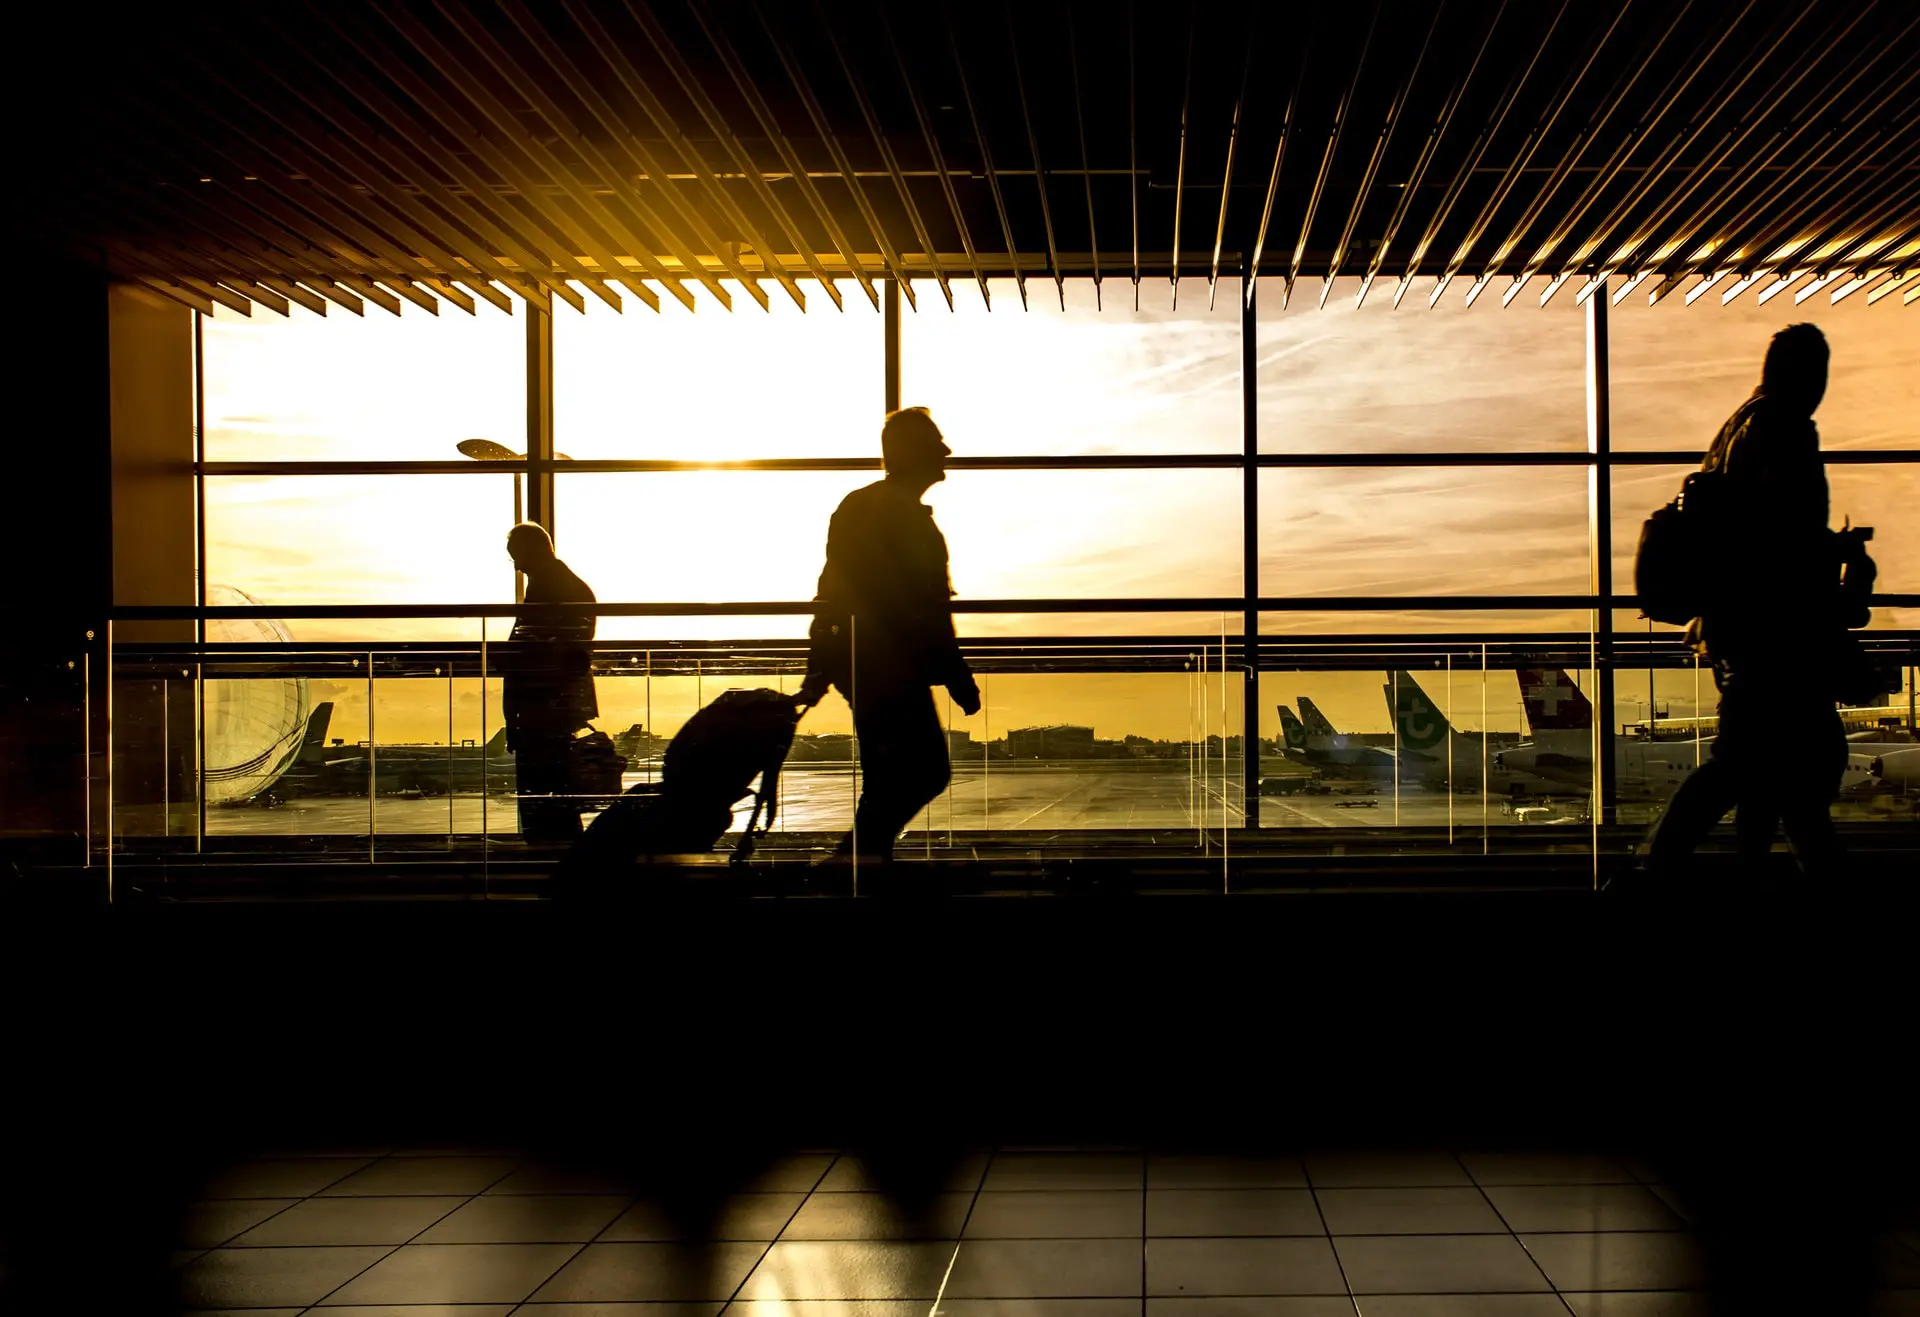 How long can you stay in an airport?